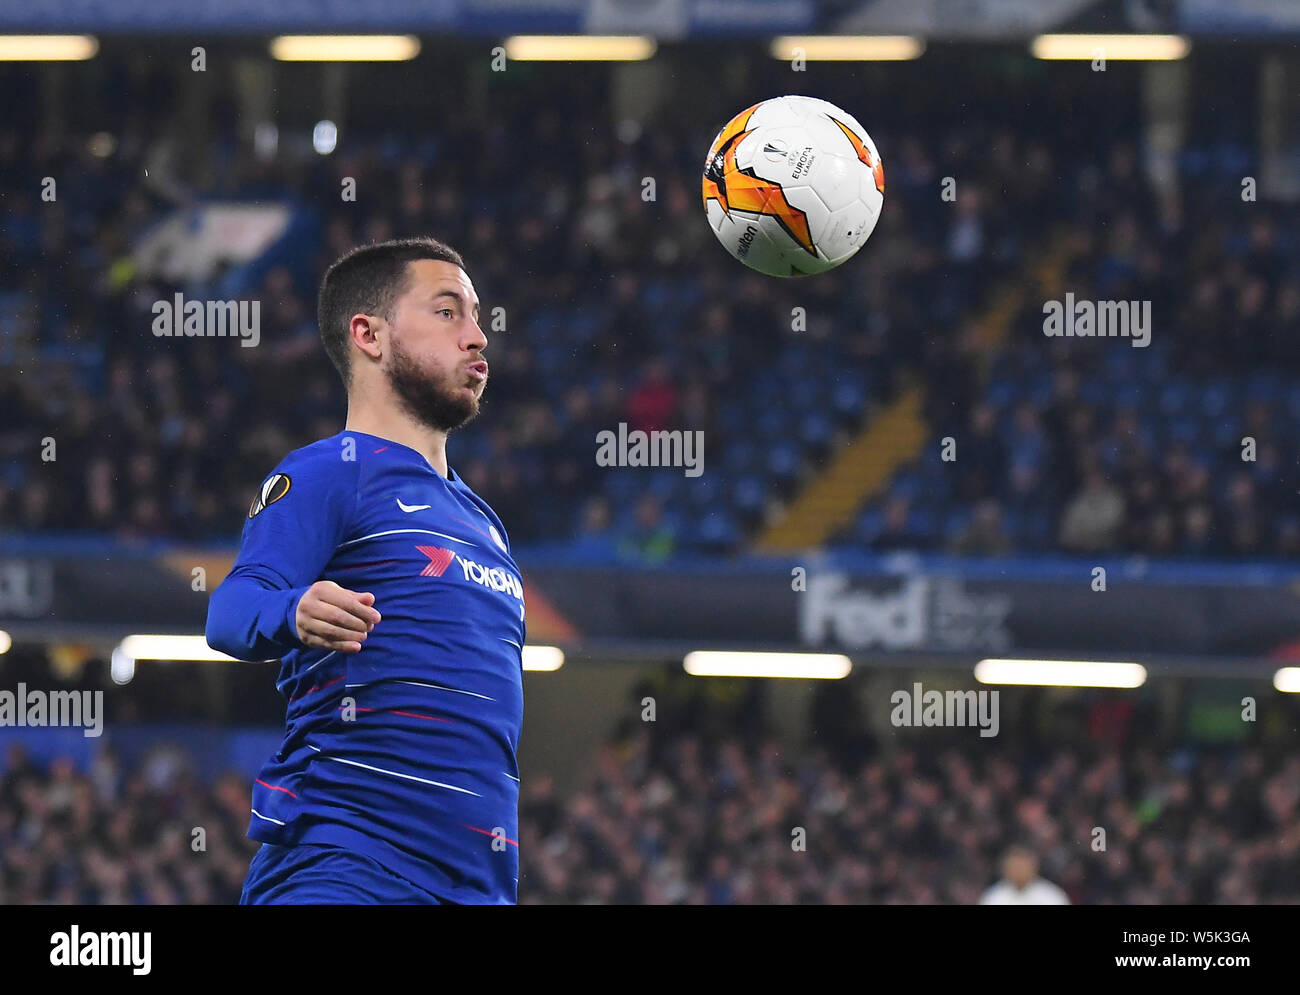 LONDON, ENGLAND - MAY 9, 2019: Eden Hazard of Chelsea pictured during the second leg of the 2018/19 UEFA Europa League Semi-Finals game between Chelsea FC (England) and Eintracht Frankfurt e.V. (Germany) at Stamford Bridge. Stock Photo